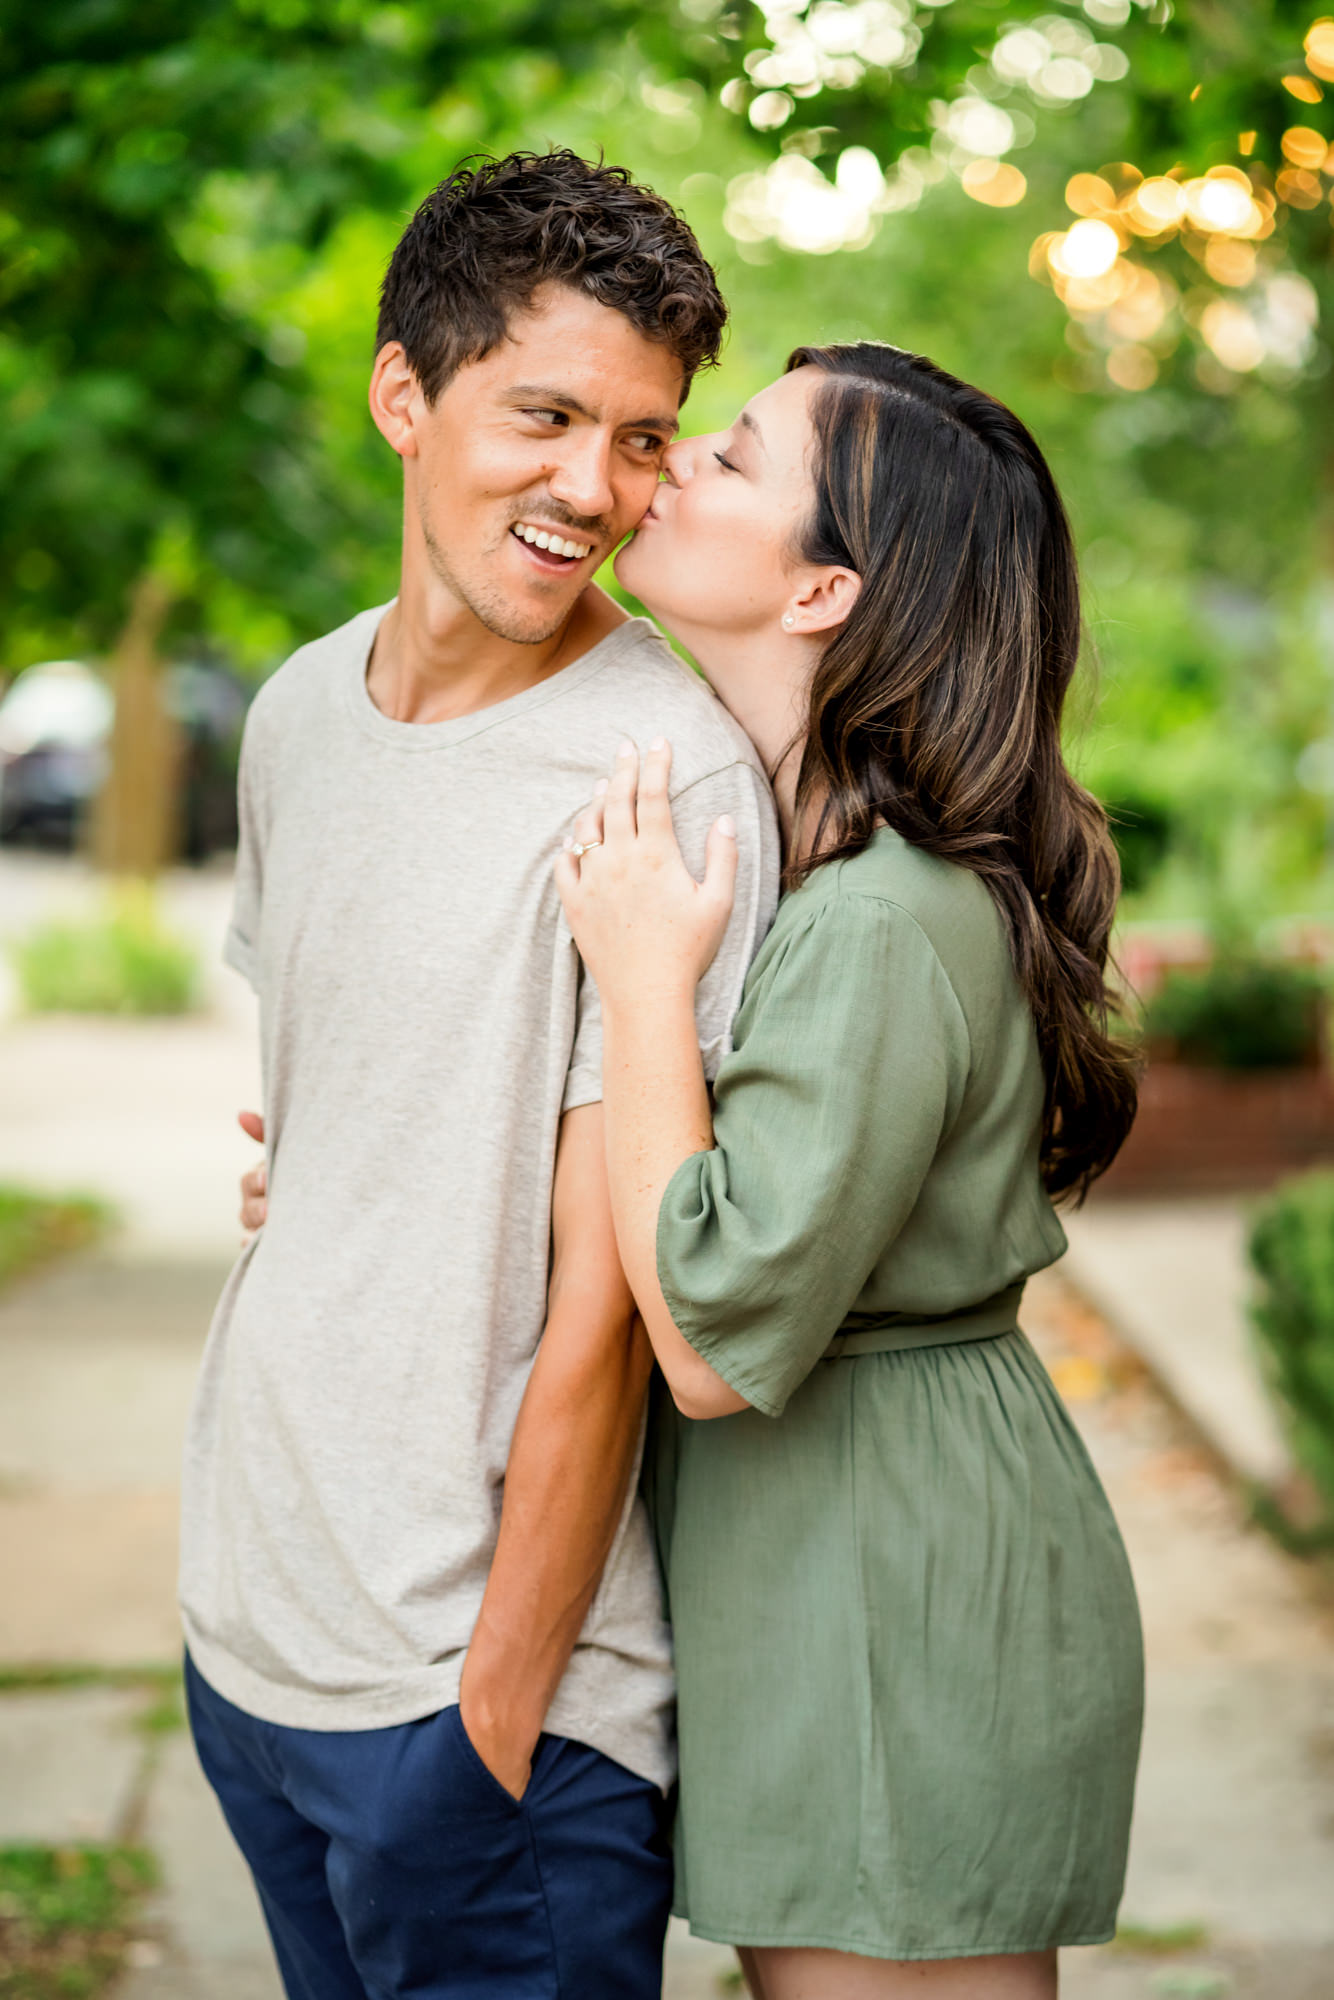 woman wearing green dress kissing man in oatmeal shirt during richmond engagement session